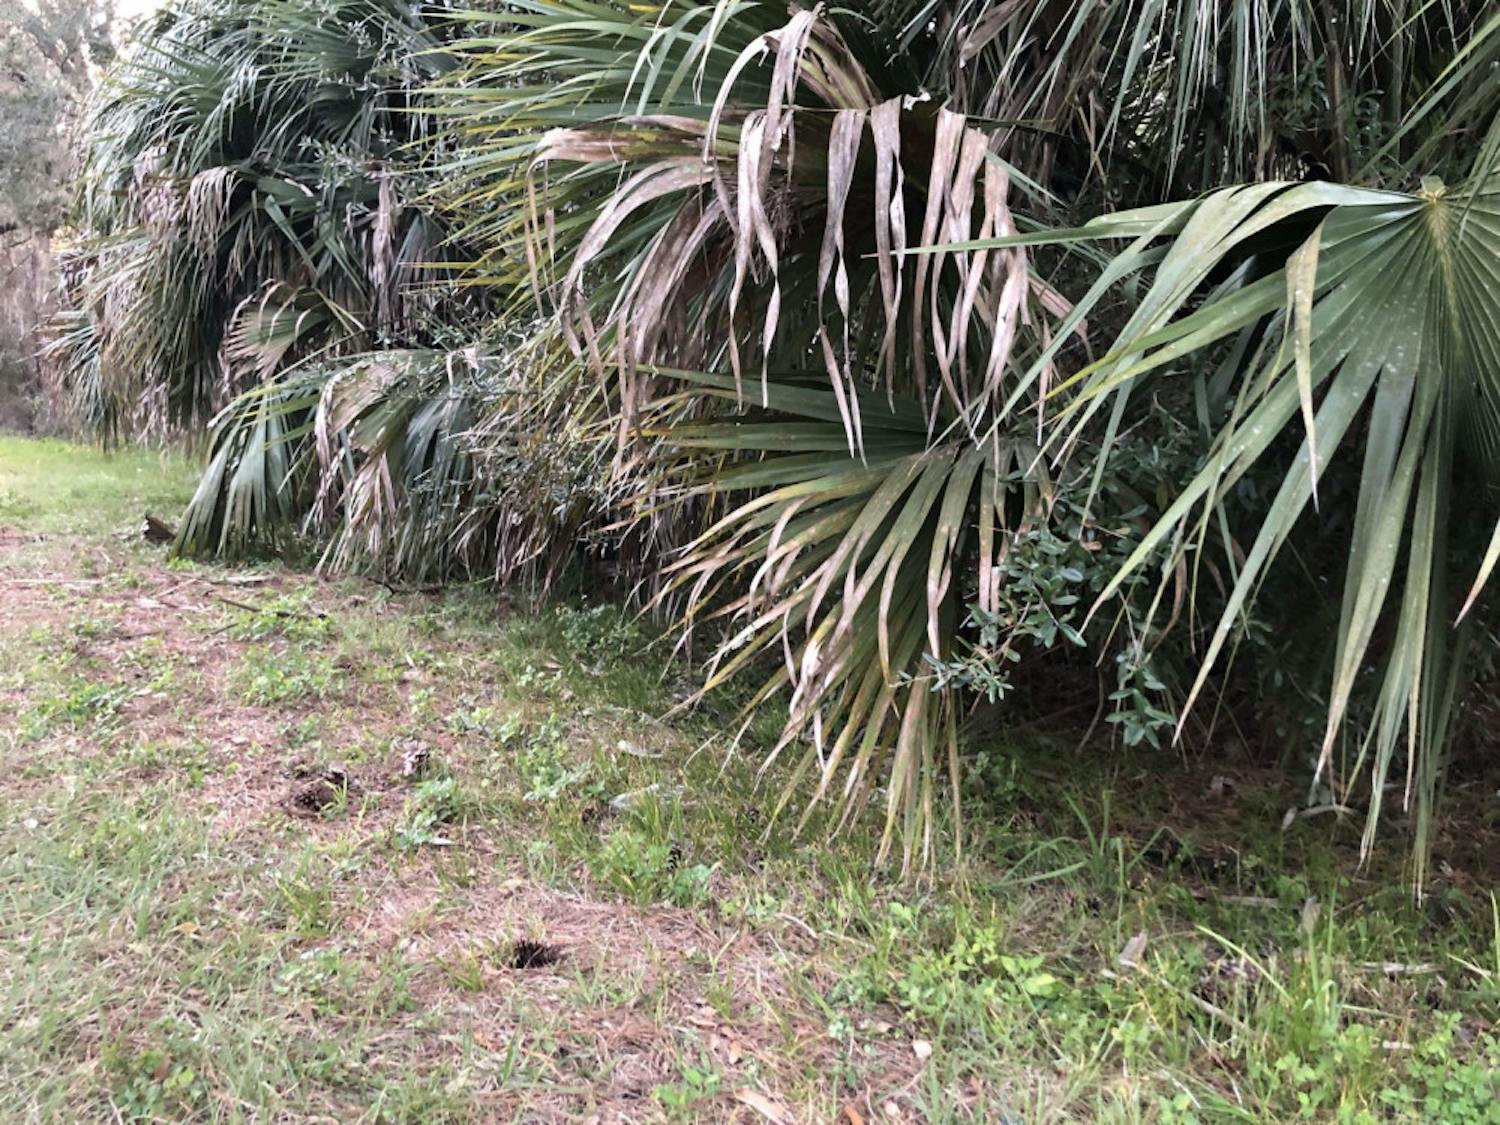 Deputies found a dead man under palm fronds by the side of Country Road 234 in Micanopy Monday.&nbsp;